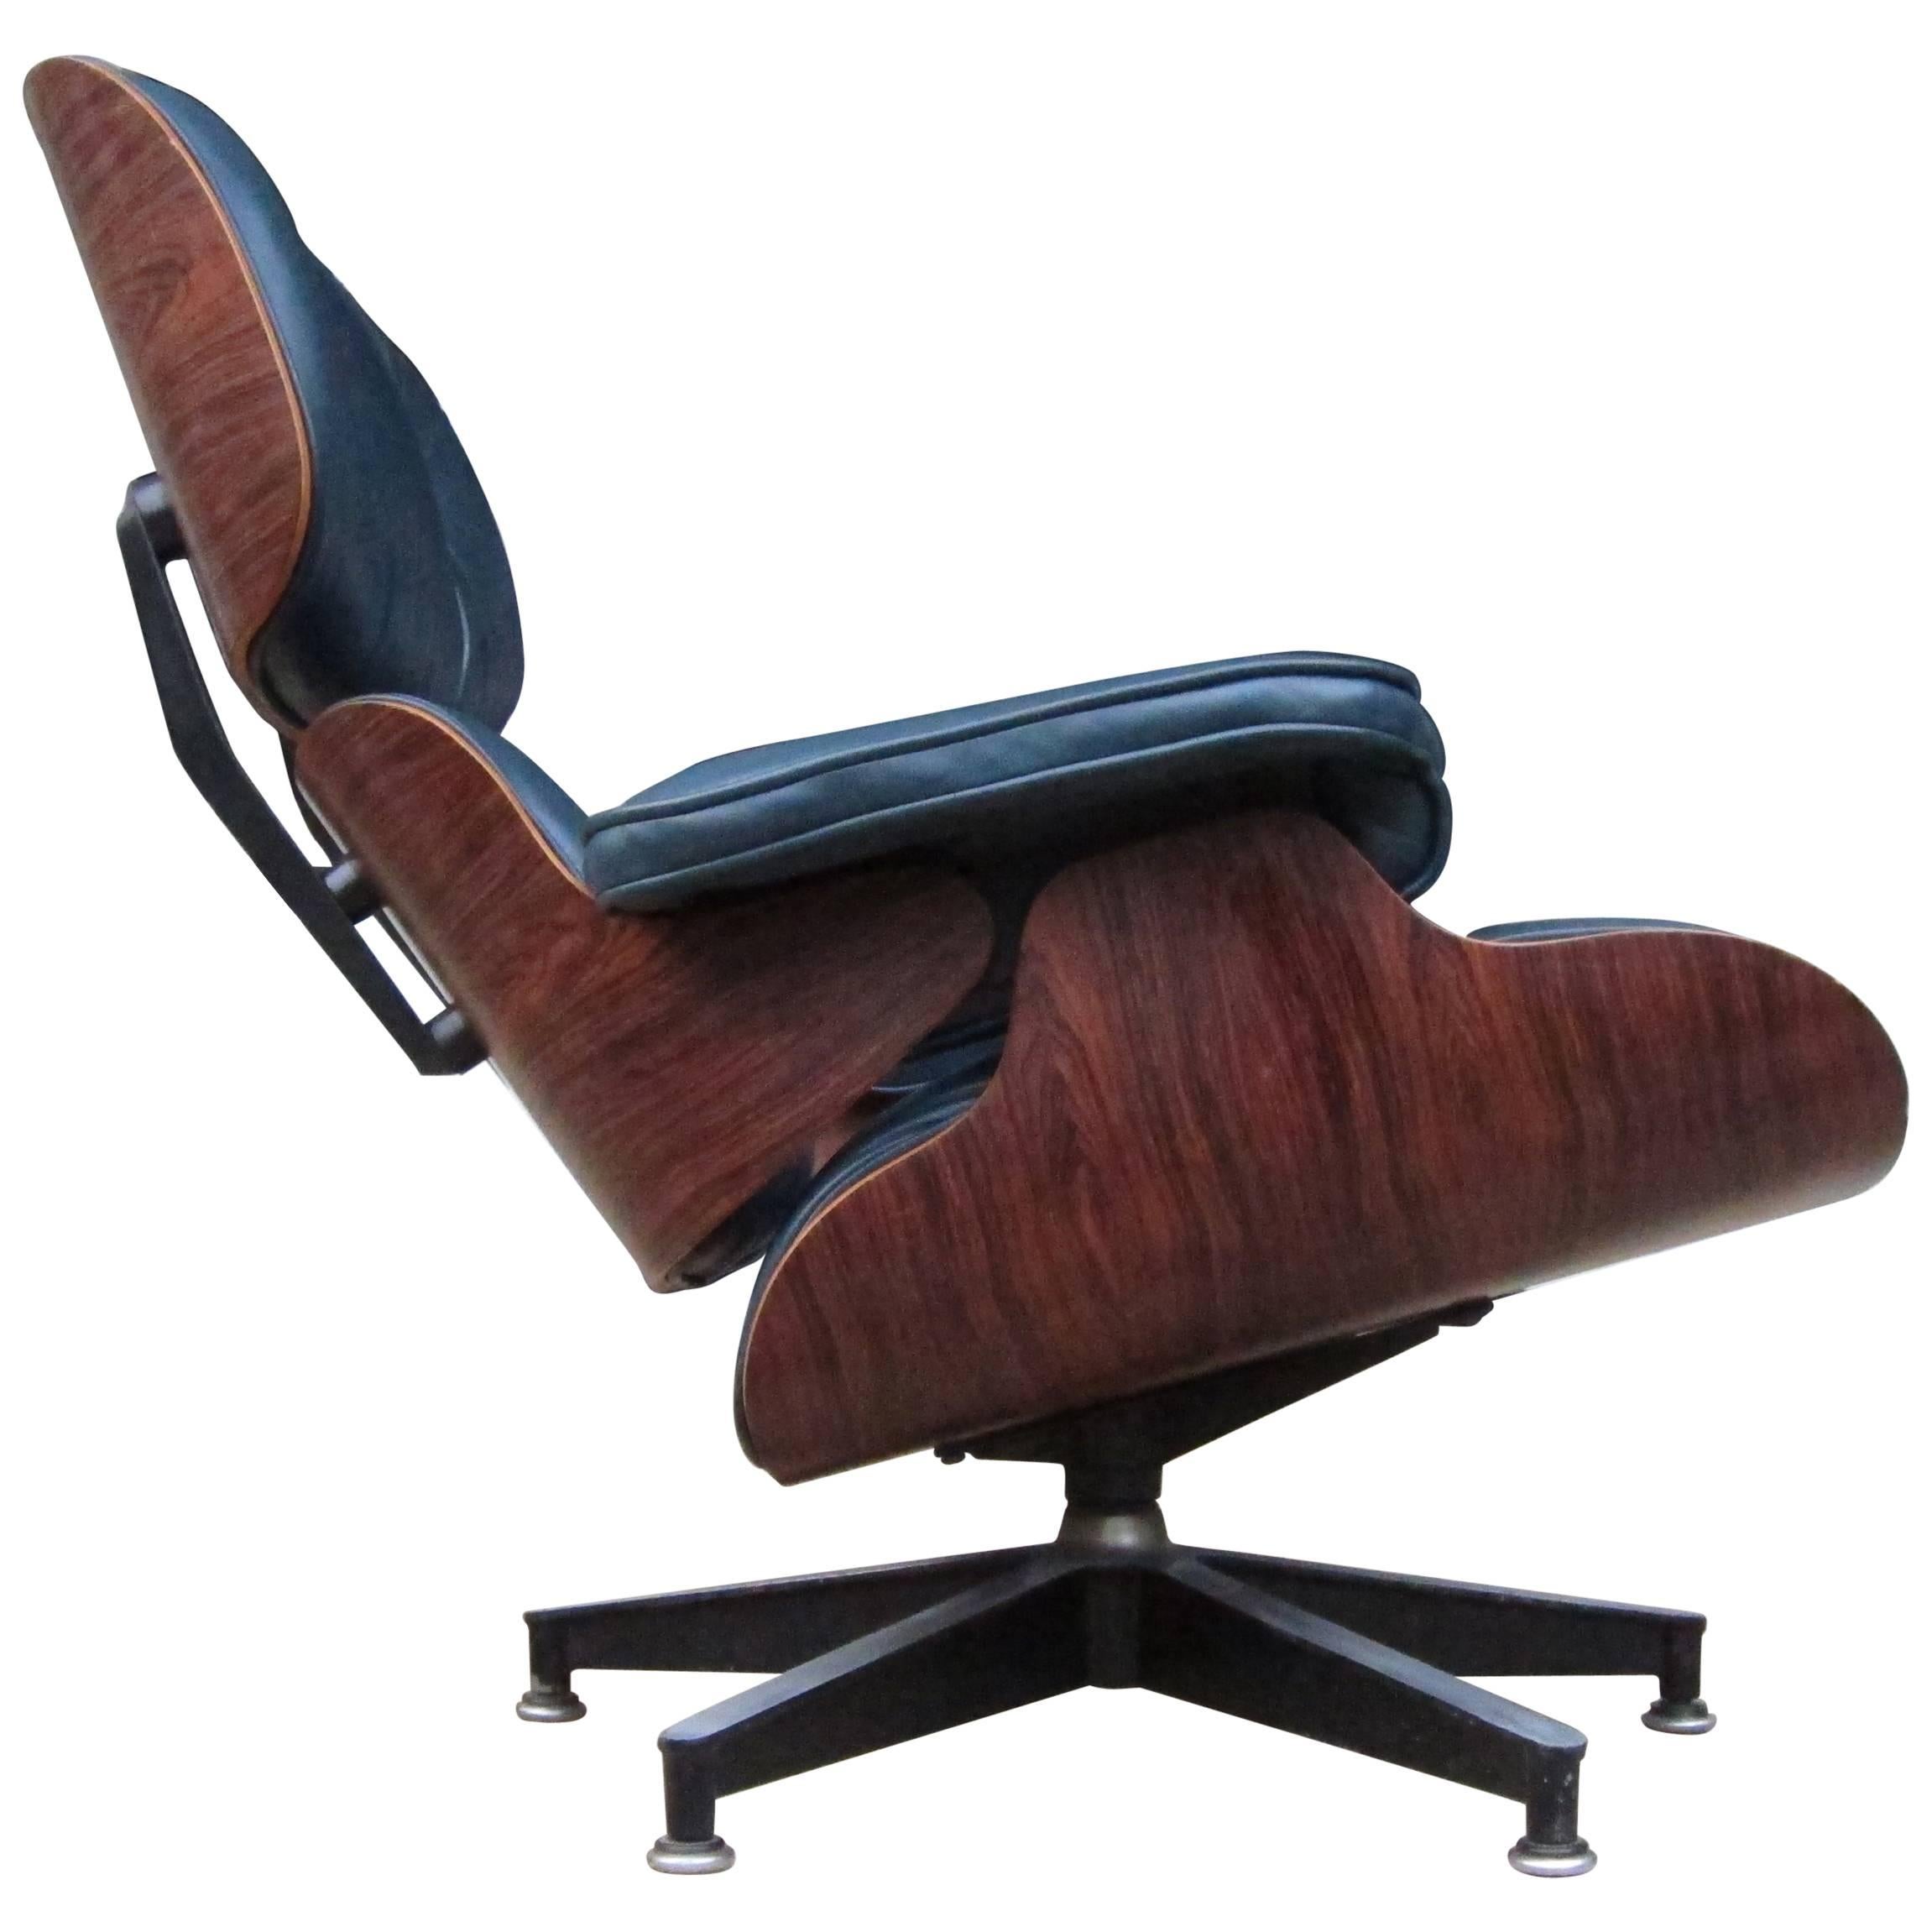 Superb Herman Miller Eames Lounge Chair in Rosewood and Custom Indigo Leather